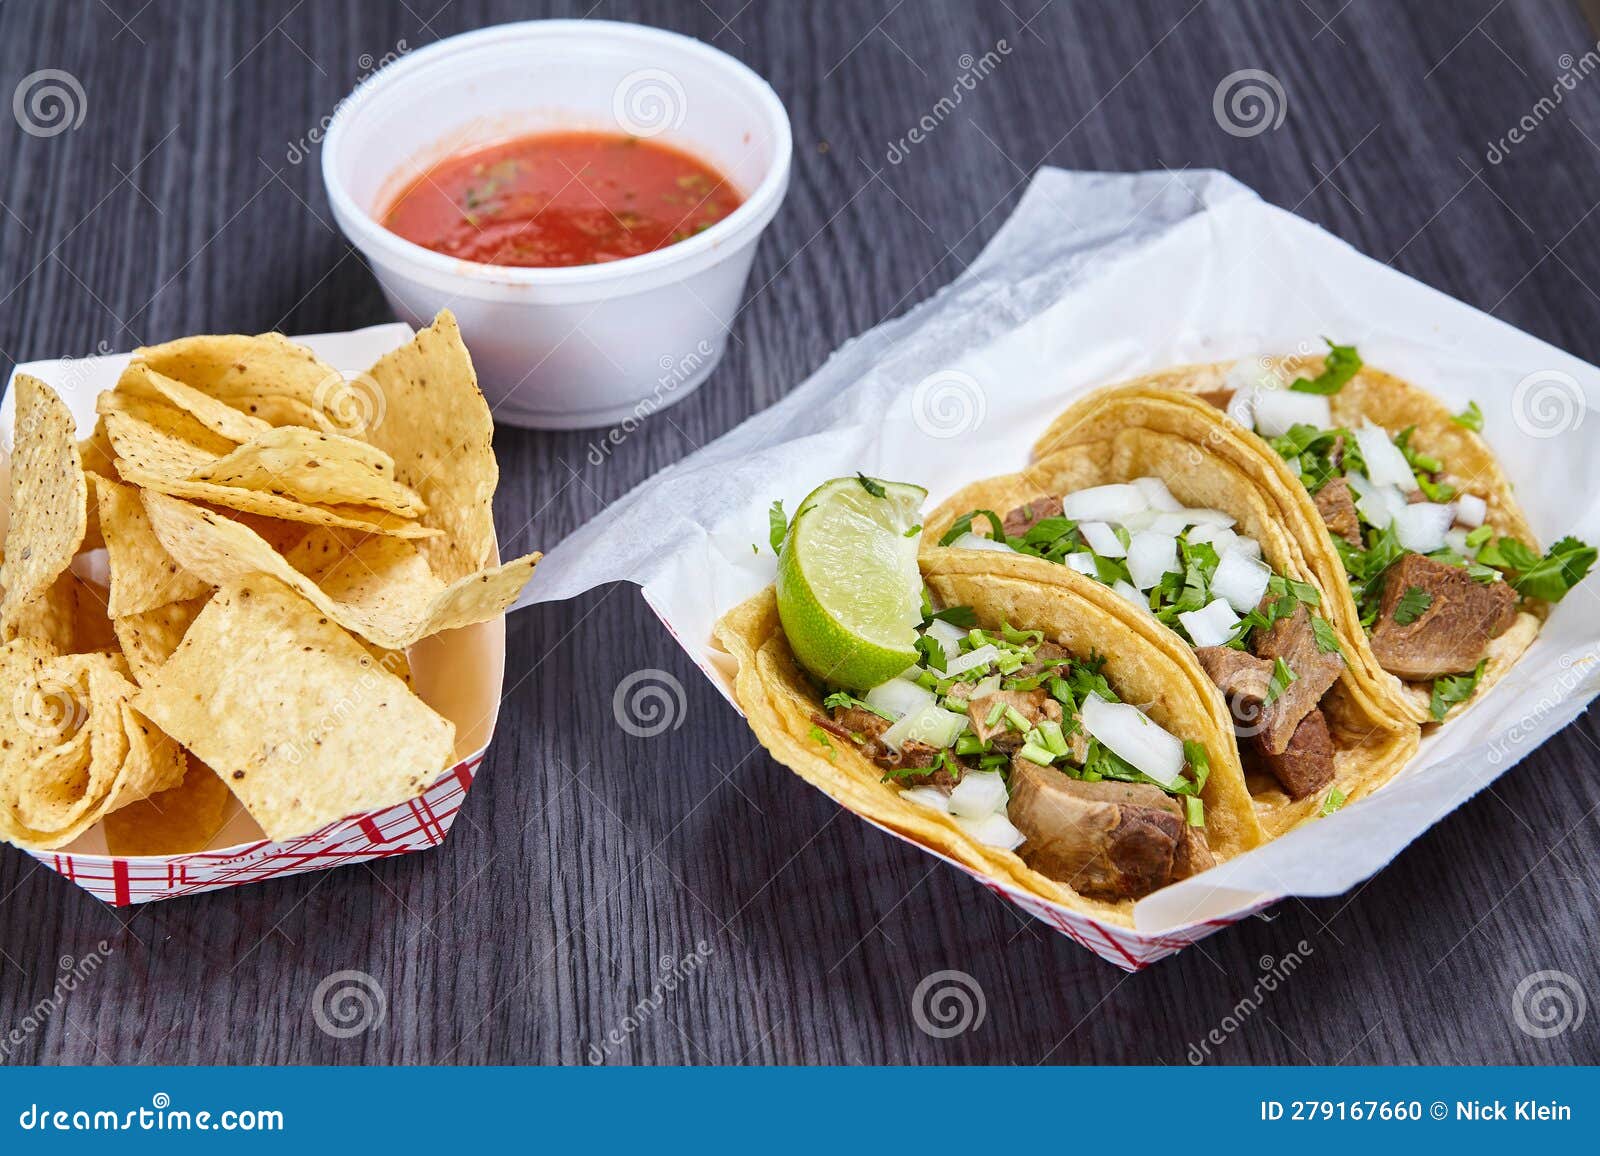 chips red salsa street taco meal 3 corn tortilla lengua cow beef tongue mexican lime wedge